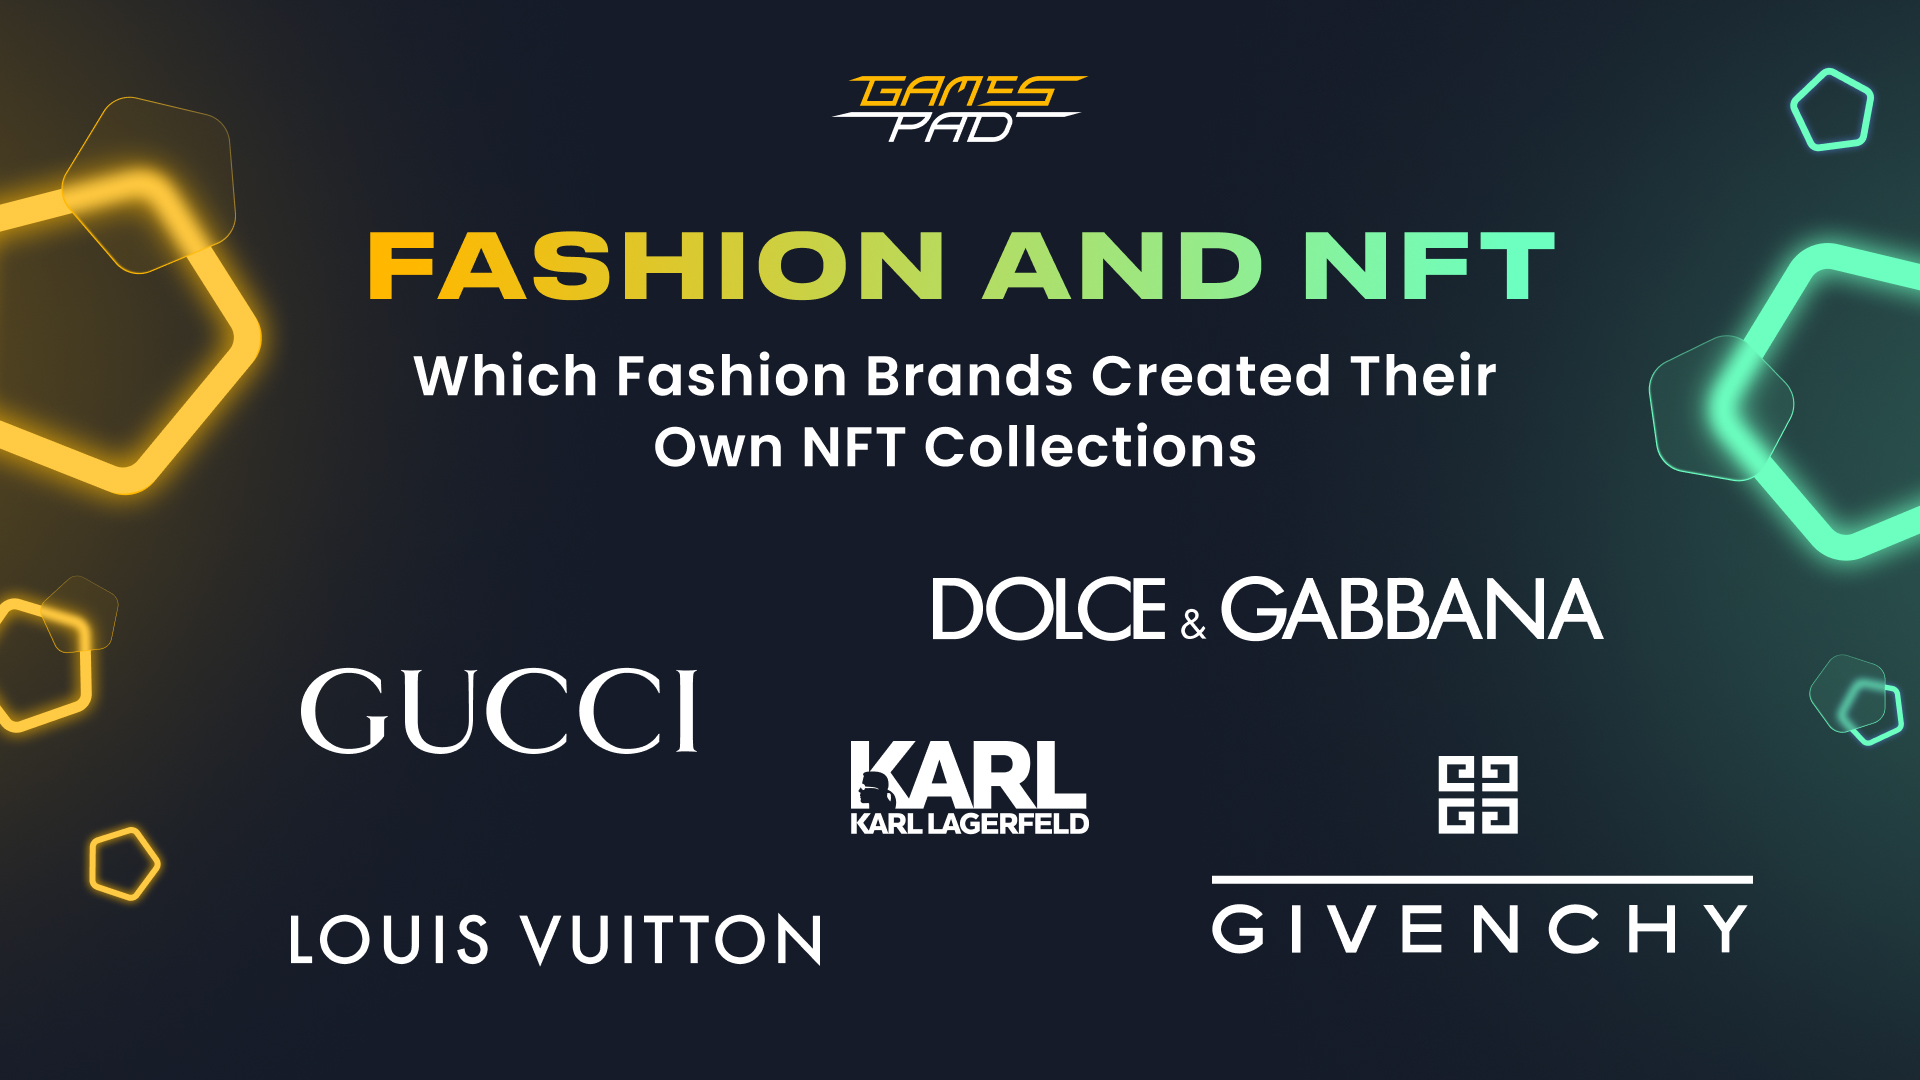 GamesPad: Fashion And NFT. Which Fashion Brands Created Their Own NFT Collections 1